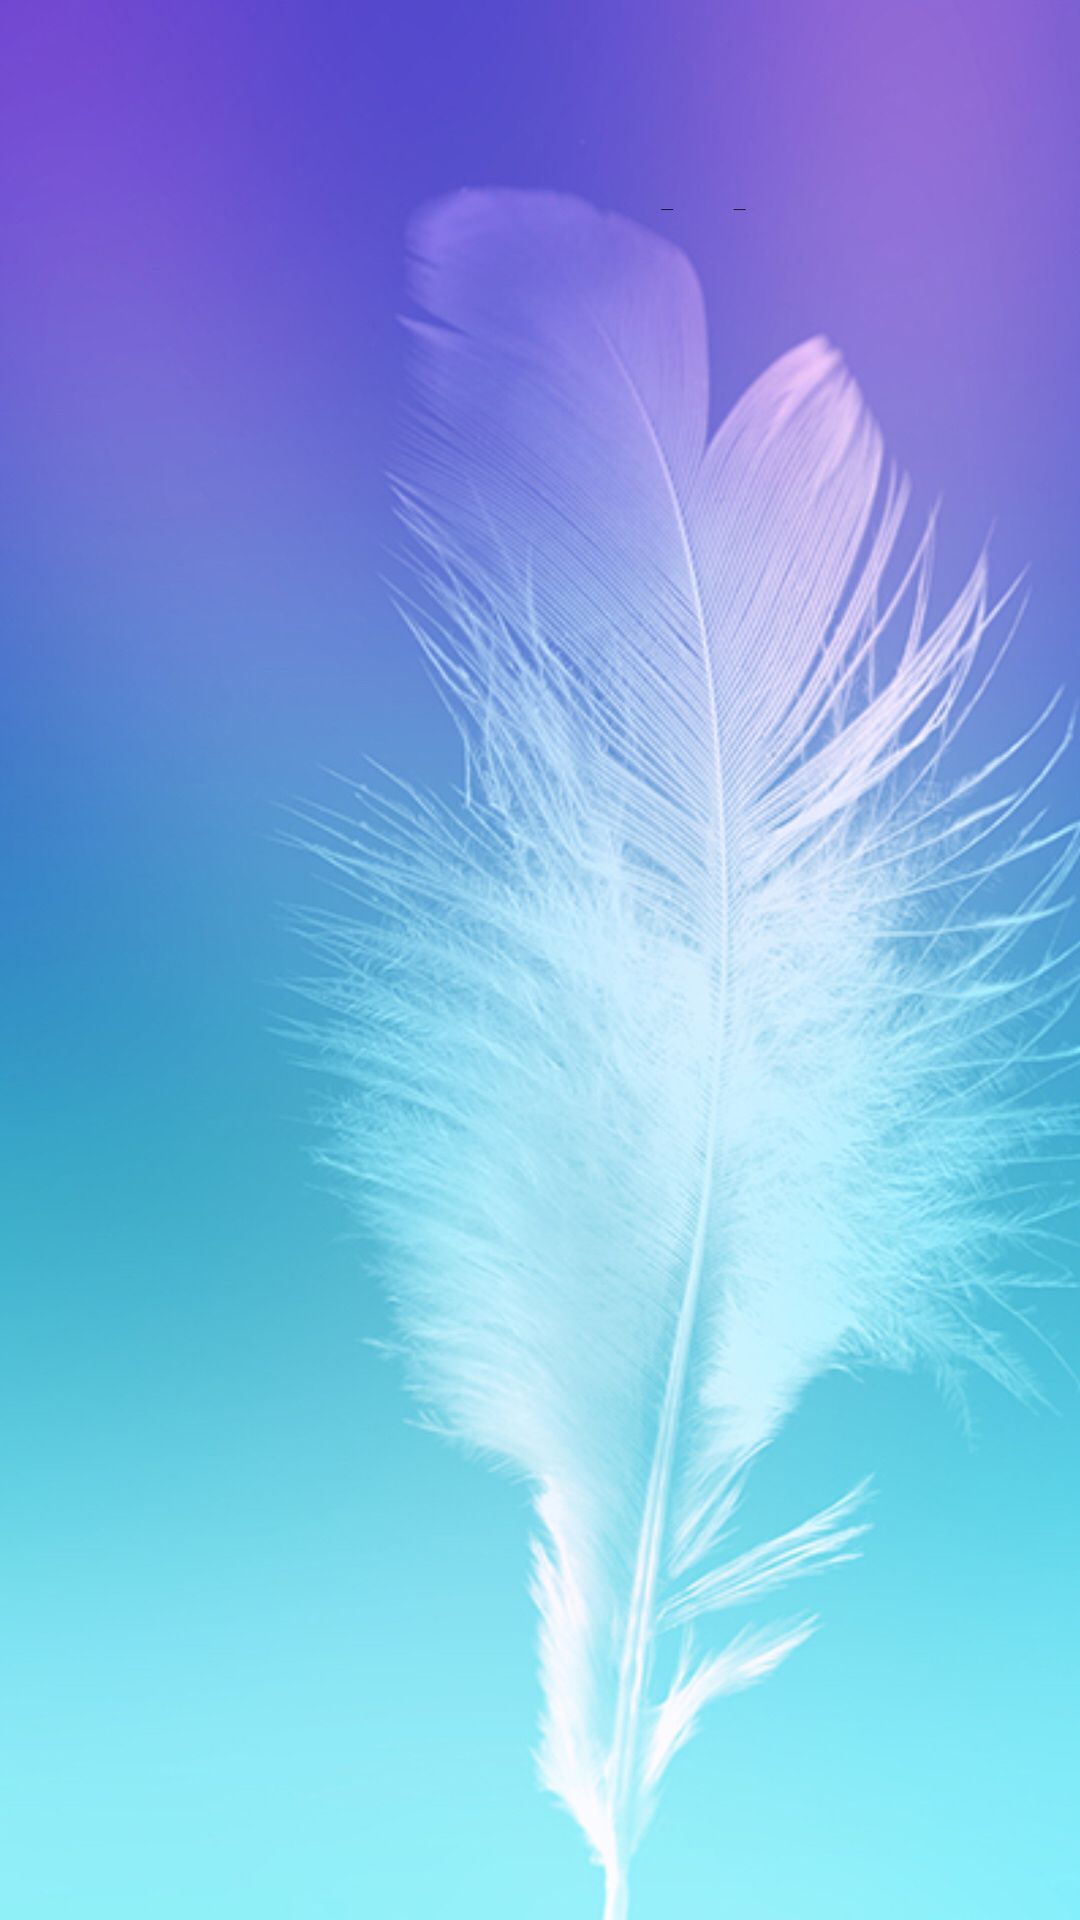 galaxy note 3 wallpaper hd 1080p,feather,blue,wing,sky,quill